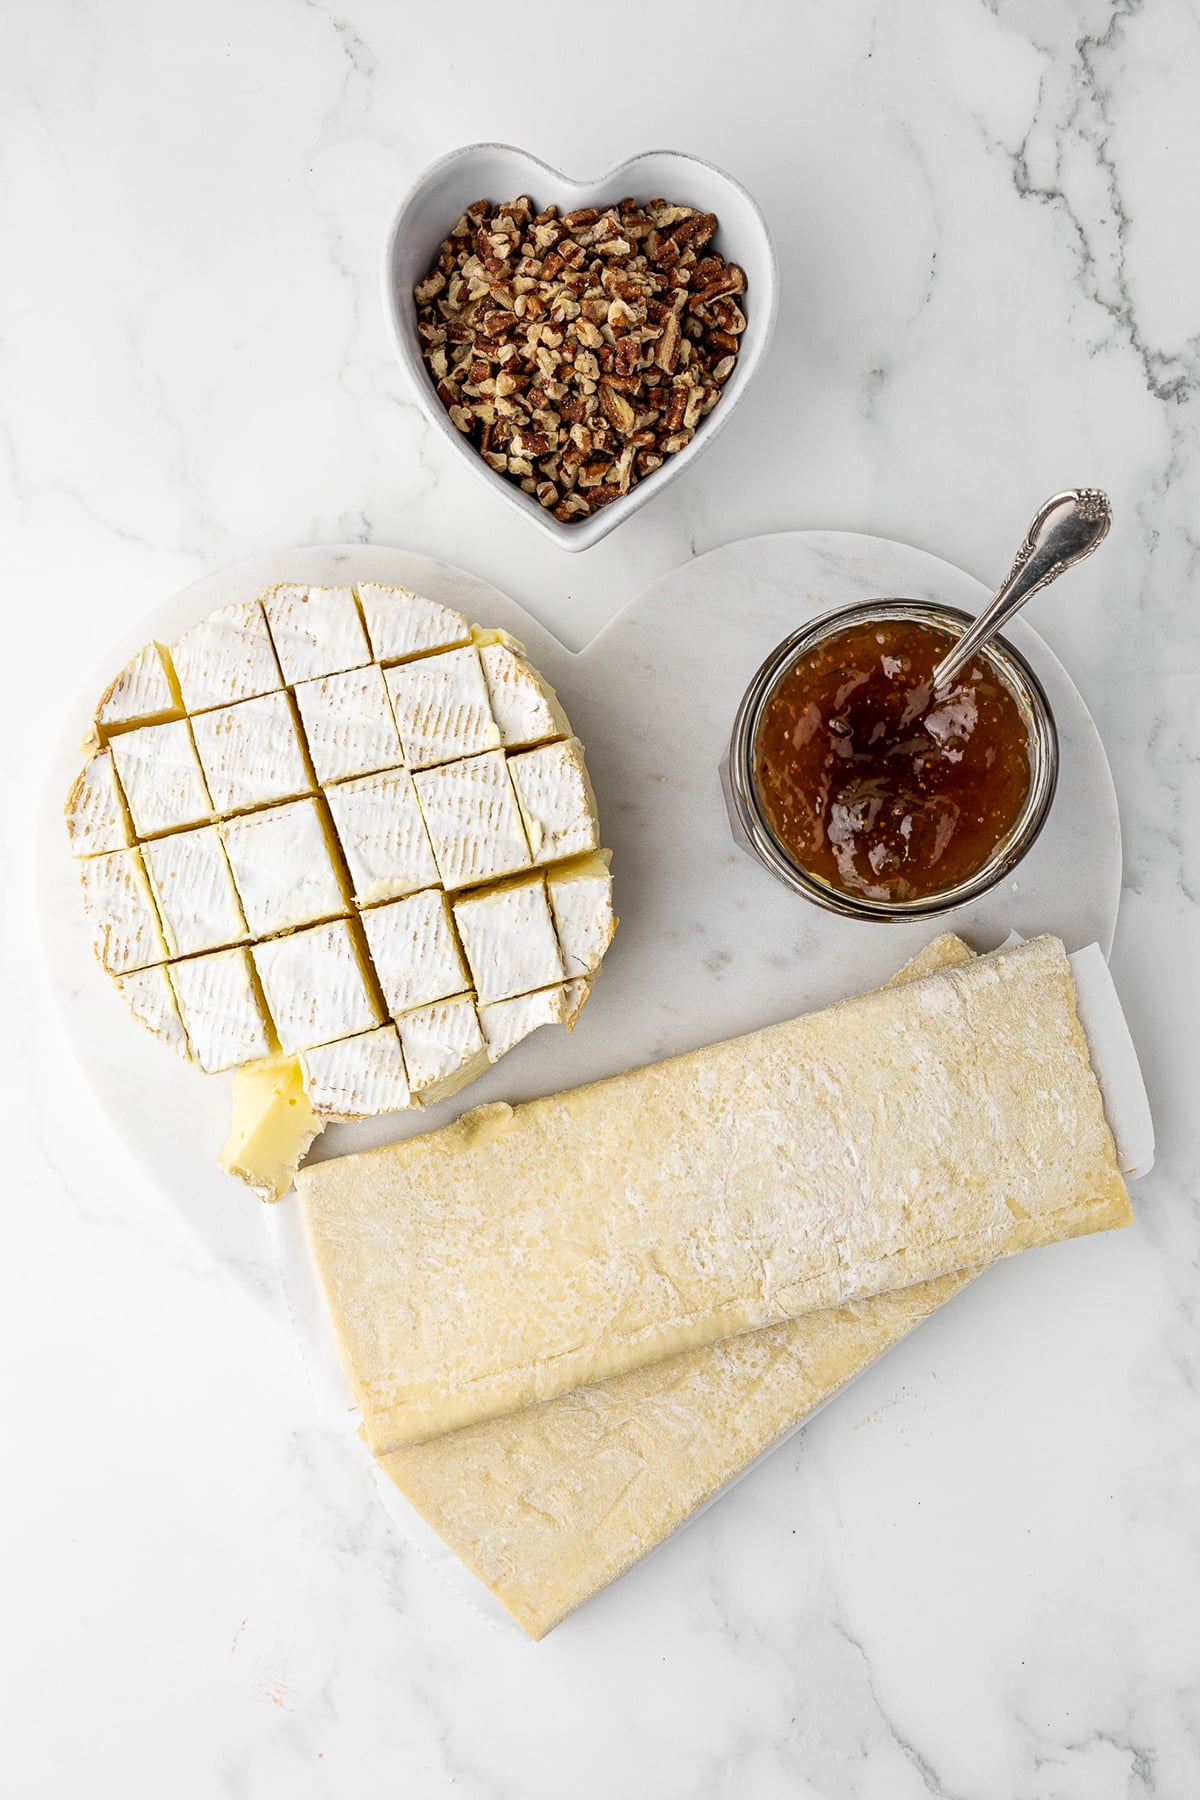 white marble countertop with a heat shaped cutting board in the middle. A cubed wheel of brie, a jar of fig jam, and two sheets of folded puff pastry are on the cutting board and a heart shaped dish hold chopped walnuts.